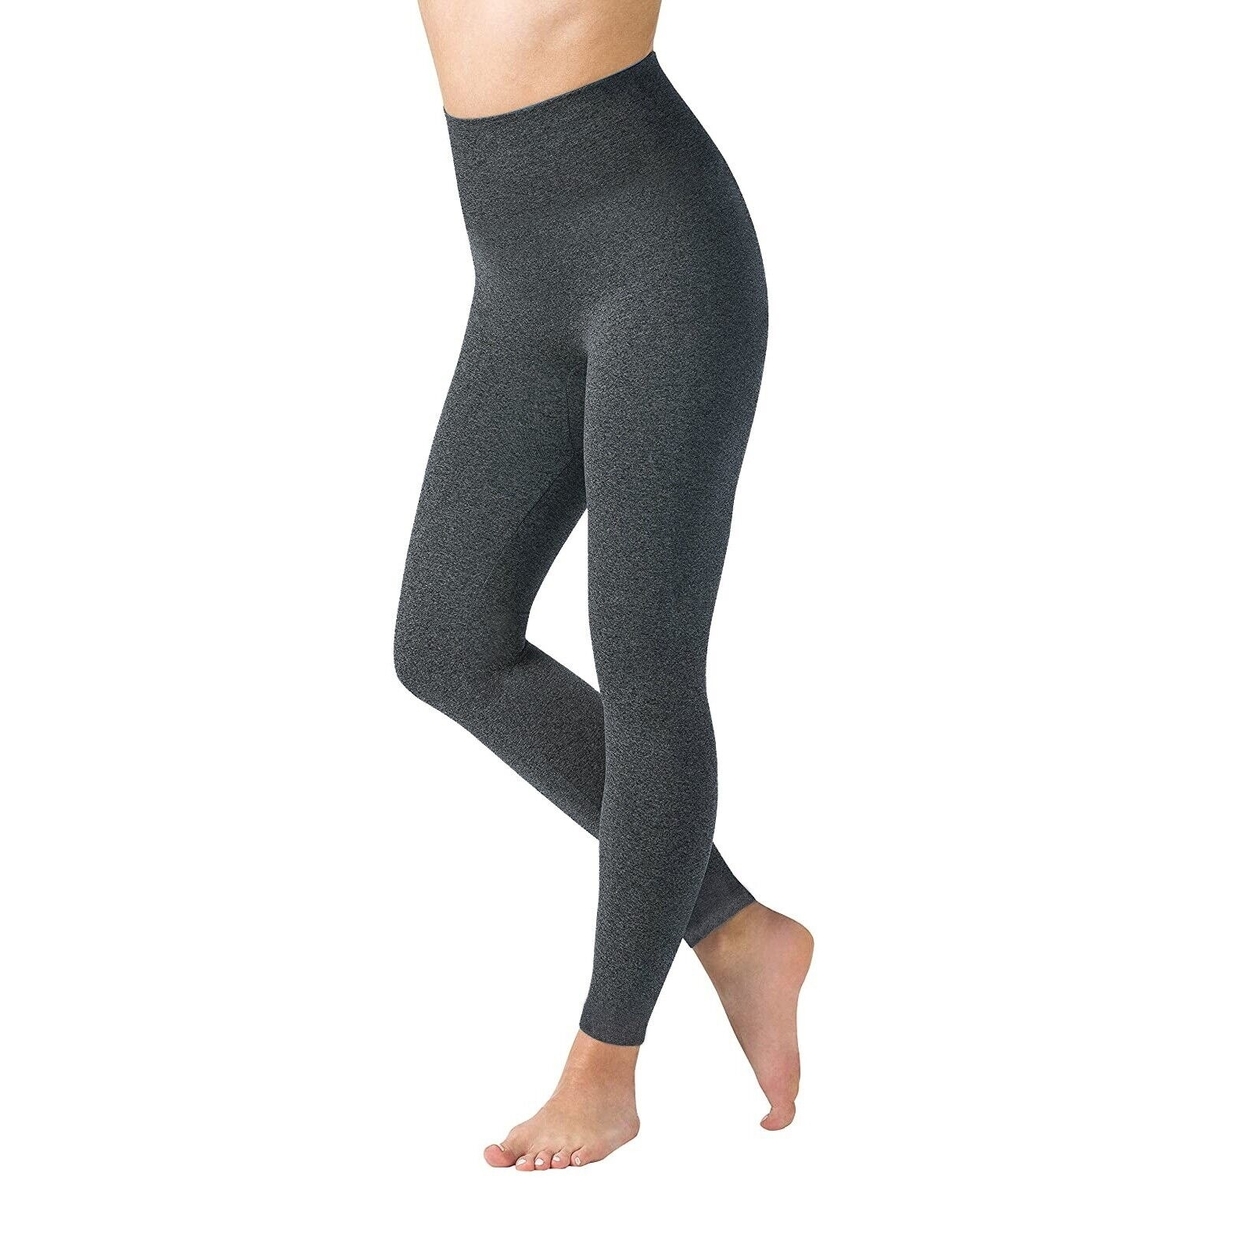 Women's Winter Warm Marled High Waist Fleece Lined Thick Thermal Leggings Pants - Charcoal, Large